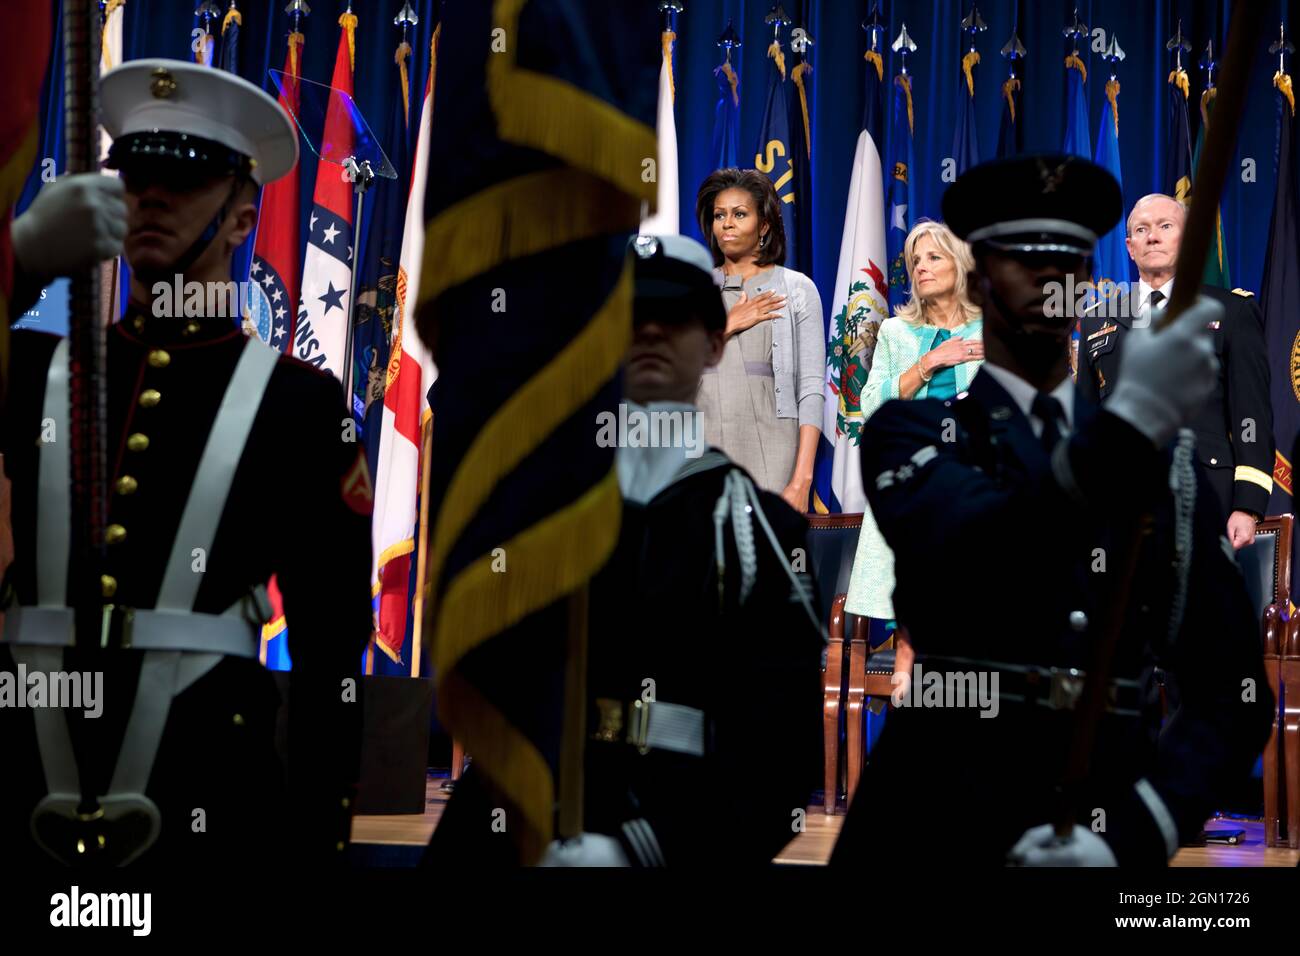 First Lady Michelle Obama, Dr. Jill Biden, and Gen. Martin Dempsey, Chairman of the Joint Chiefs of Staff, stand for the national anthem at the Pentagon in Arlington, Va., Feb. 15, 2012. During the event a report was unveiled outlining opportunities and best practices for states to better support military spouses serving in professions with state licensure requirements. (Official White House Photo by Chuck Kennedy) This official White House photograph is being made available only for publication by news organizations and/or for personal use printing by the subject(s) of the photograph. The pho Stock Photo